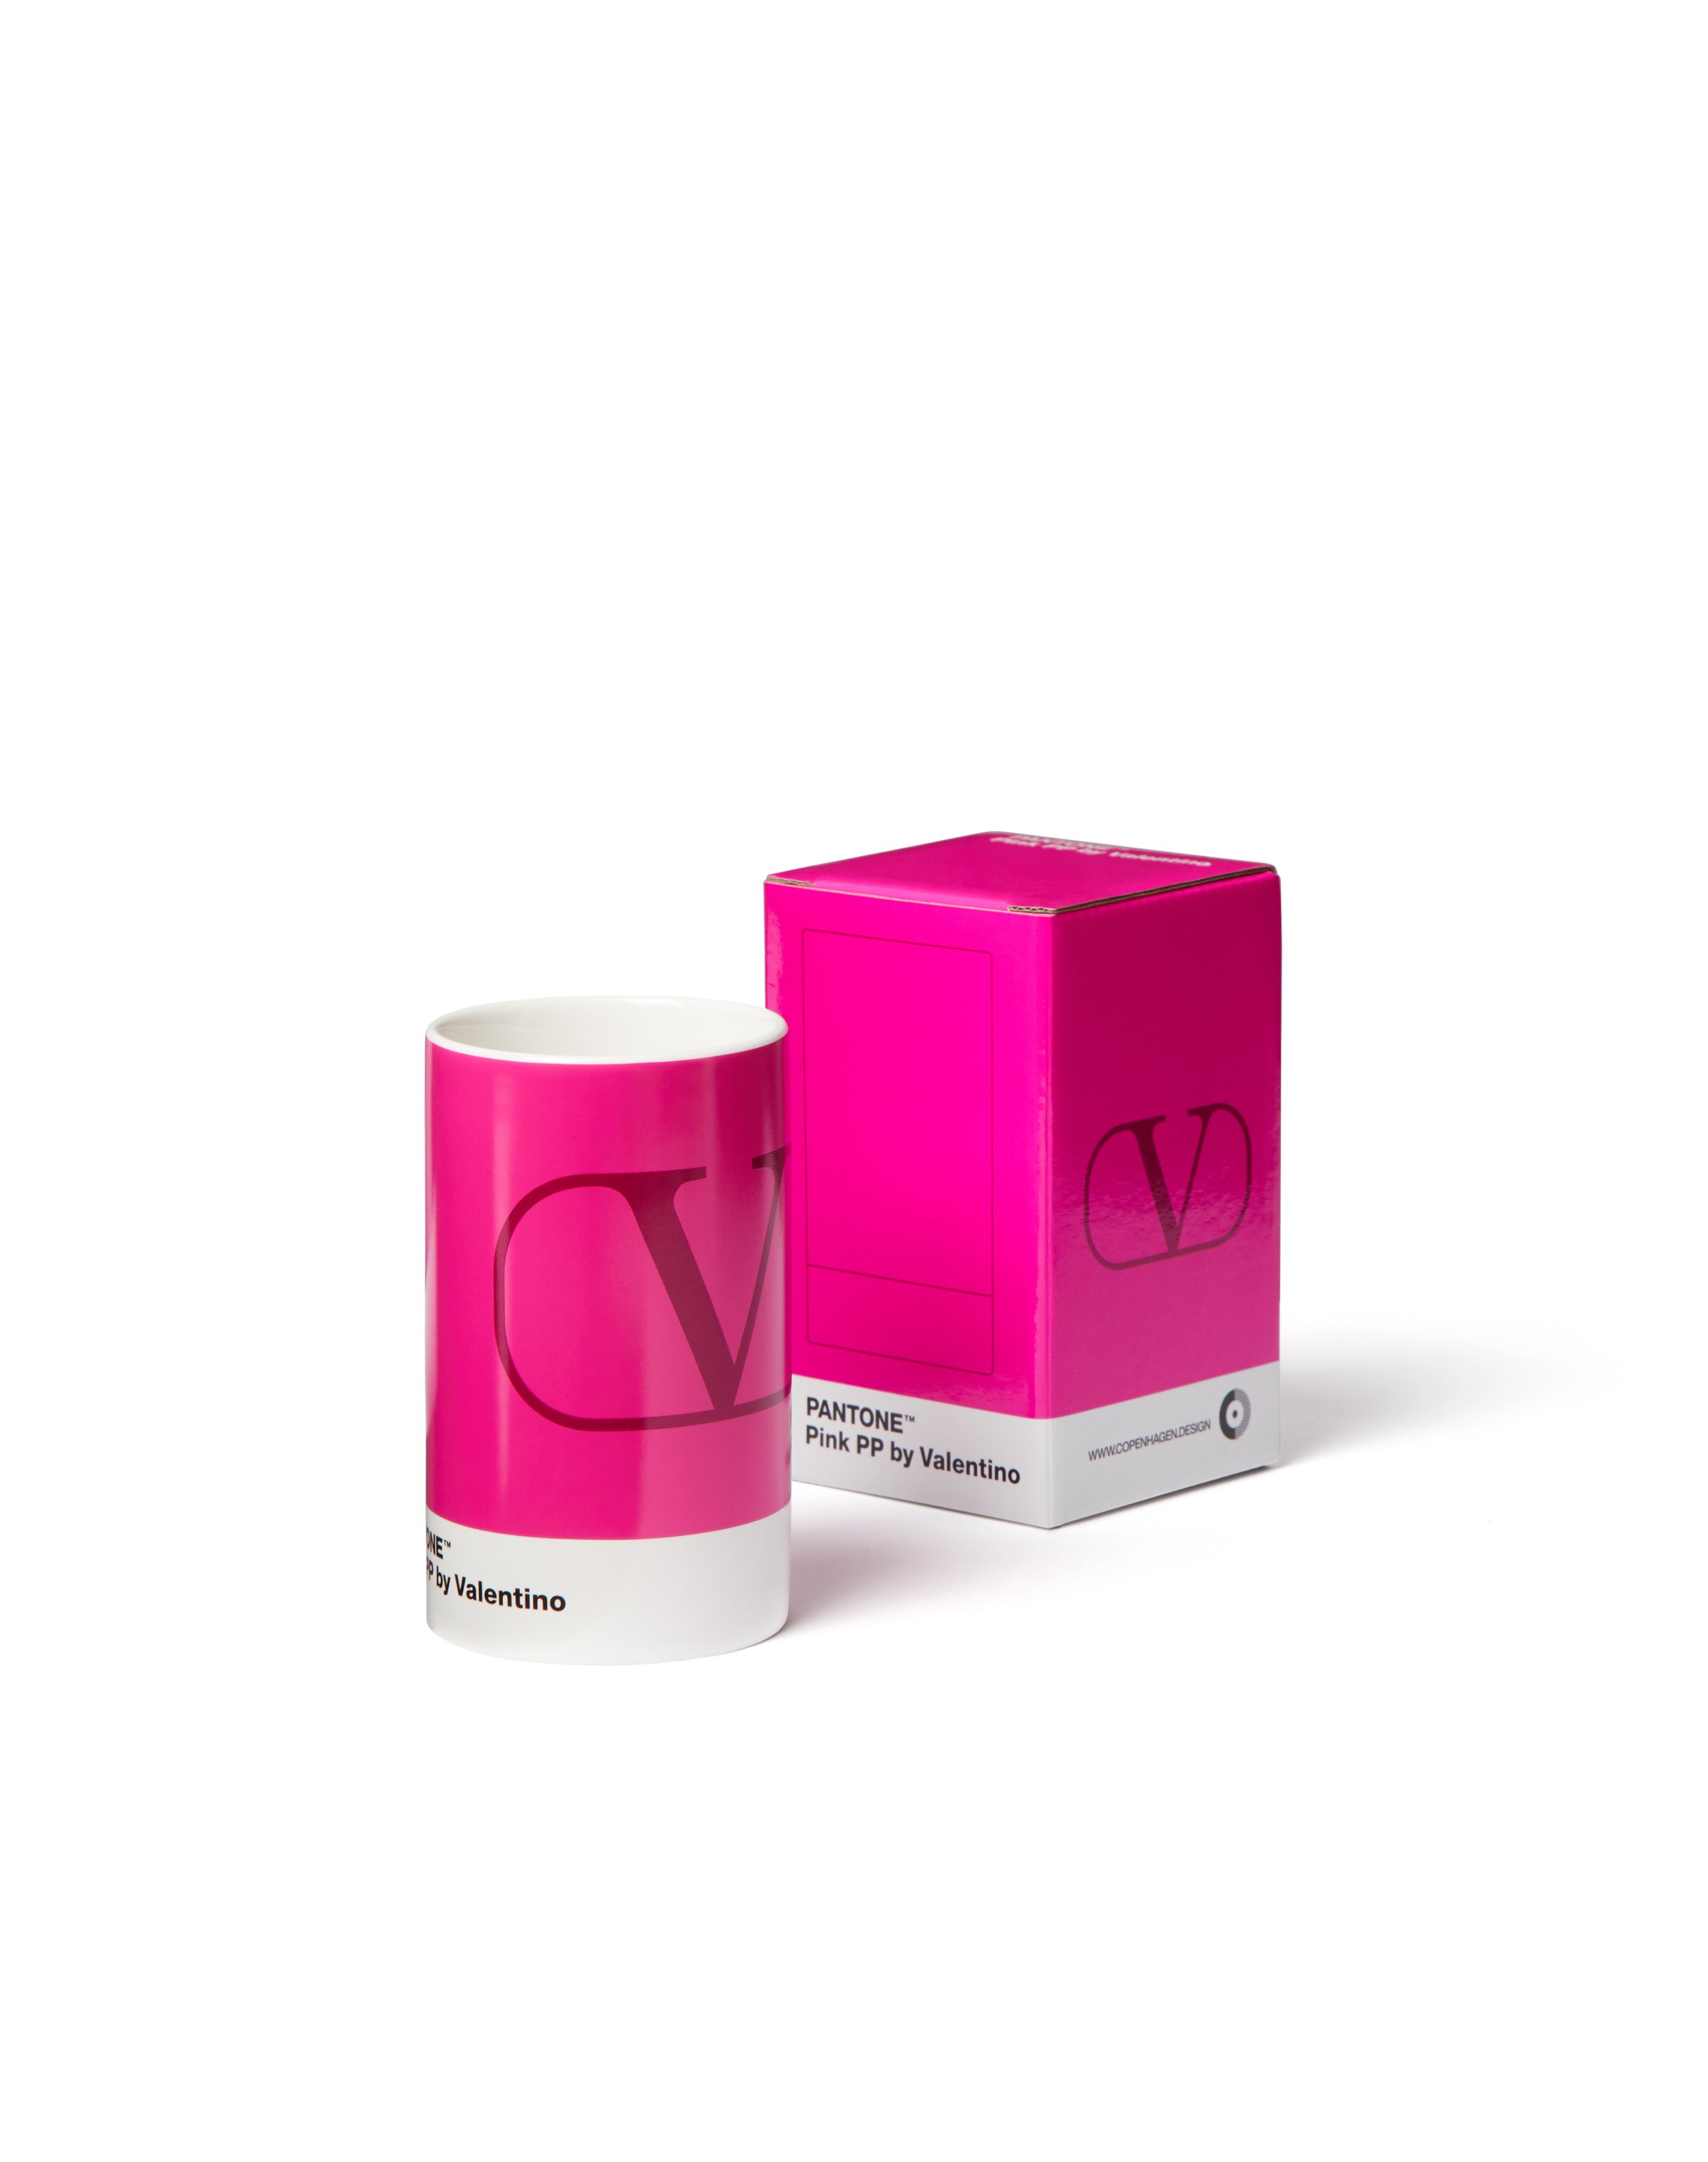 Pink PP Pantone x Valentino Limited Edition Pencil Cup